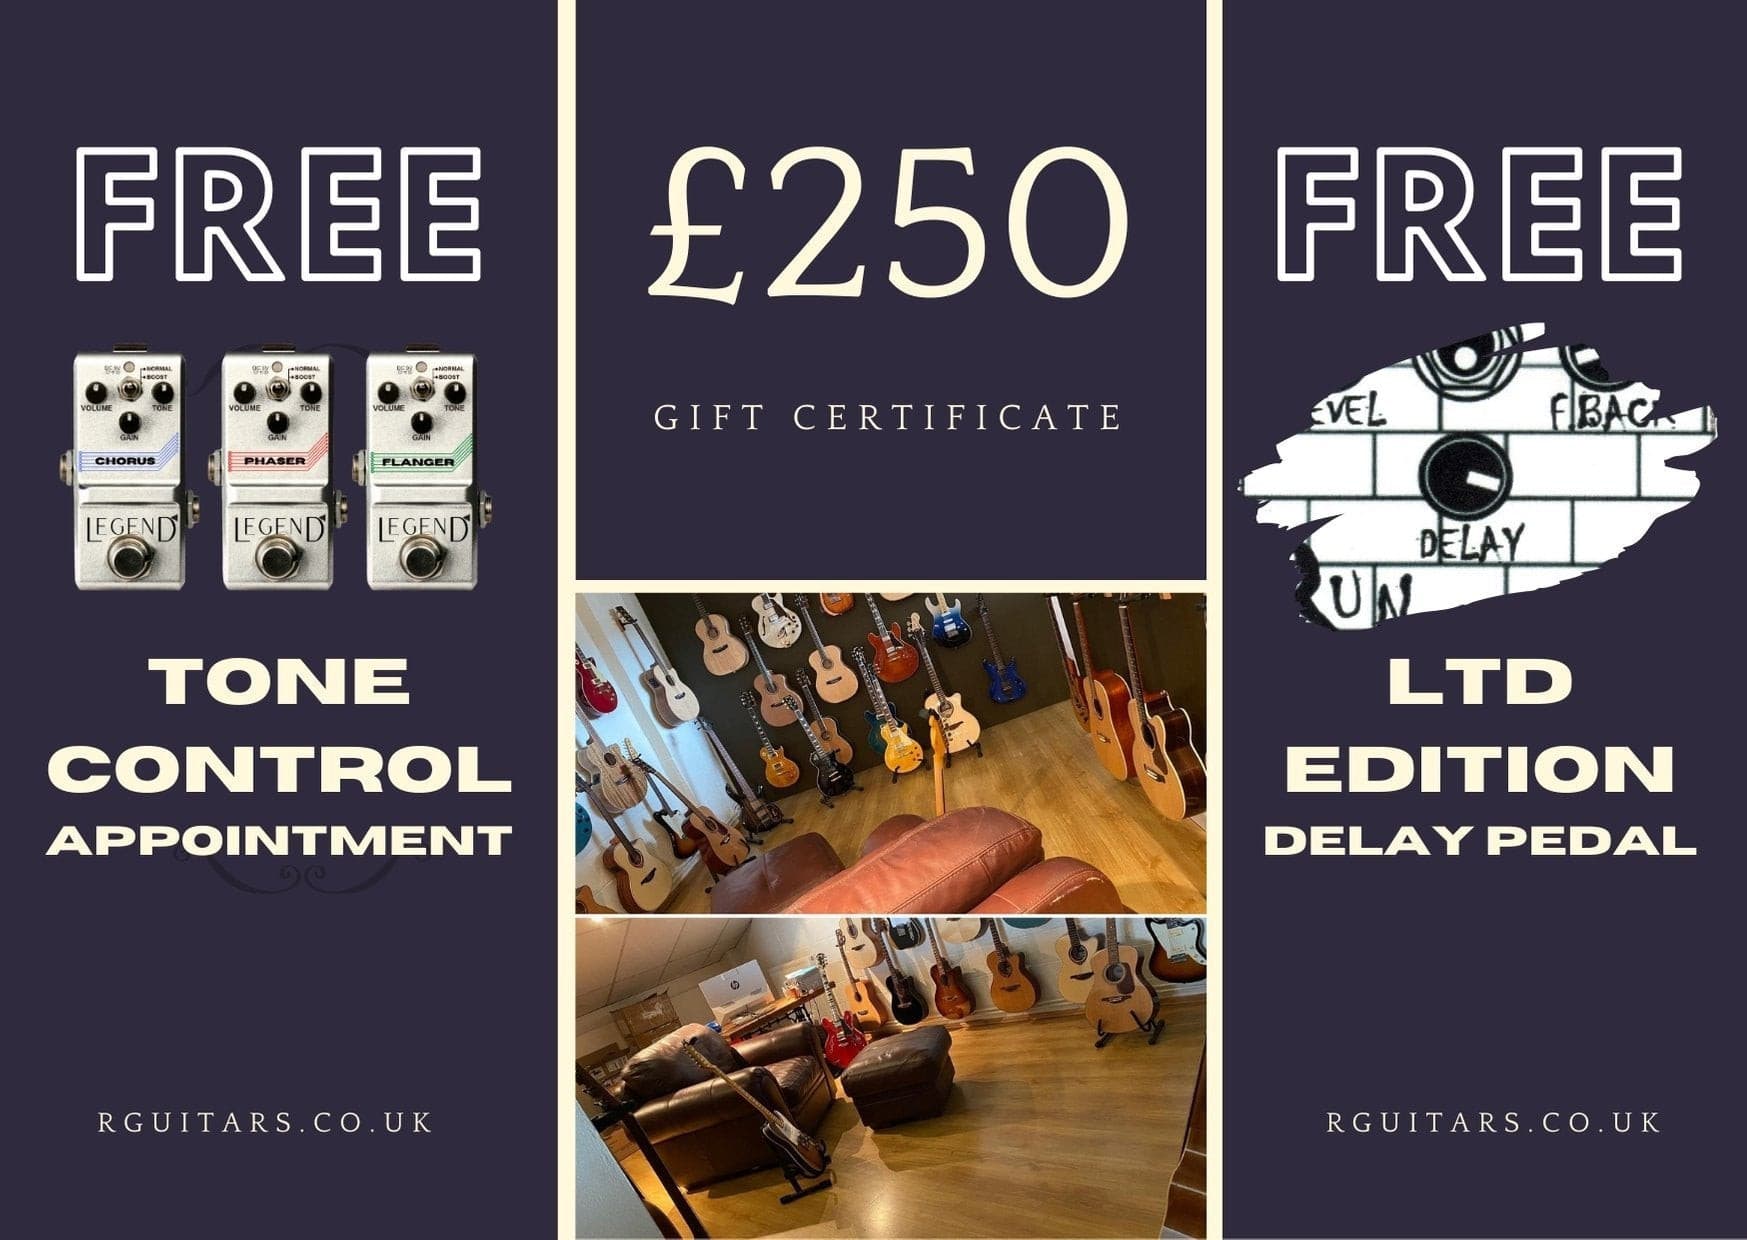 Rguitars Showroom Experience Voucher Worth £250 Plus FREE Tone Control Appointment & FREE Limited Edition (50 Only) Run Run Run Delay Pedal, Voucher for sale at Richards Guitars.